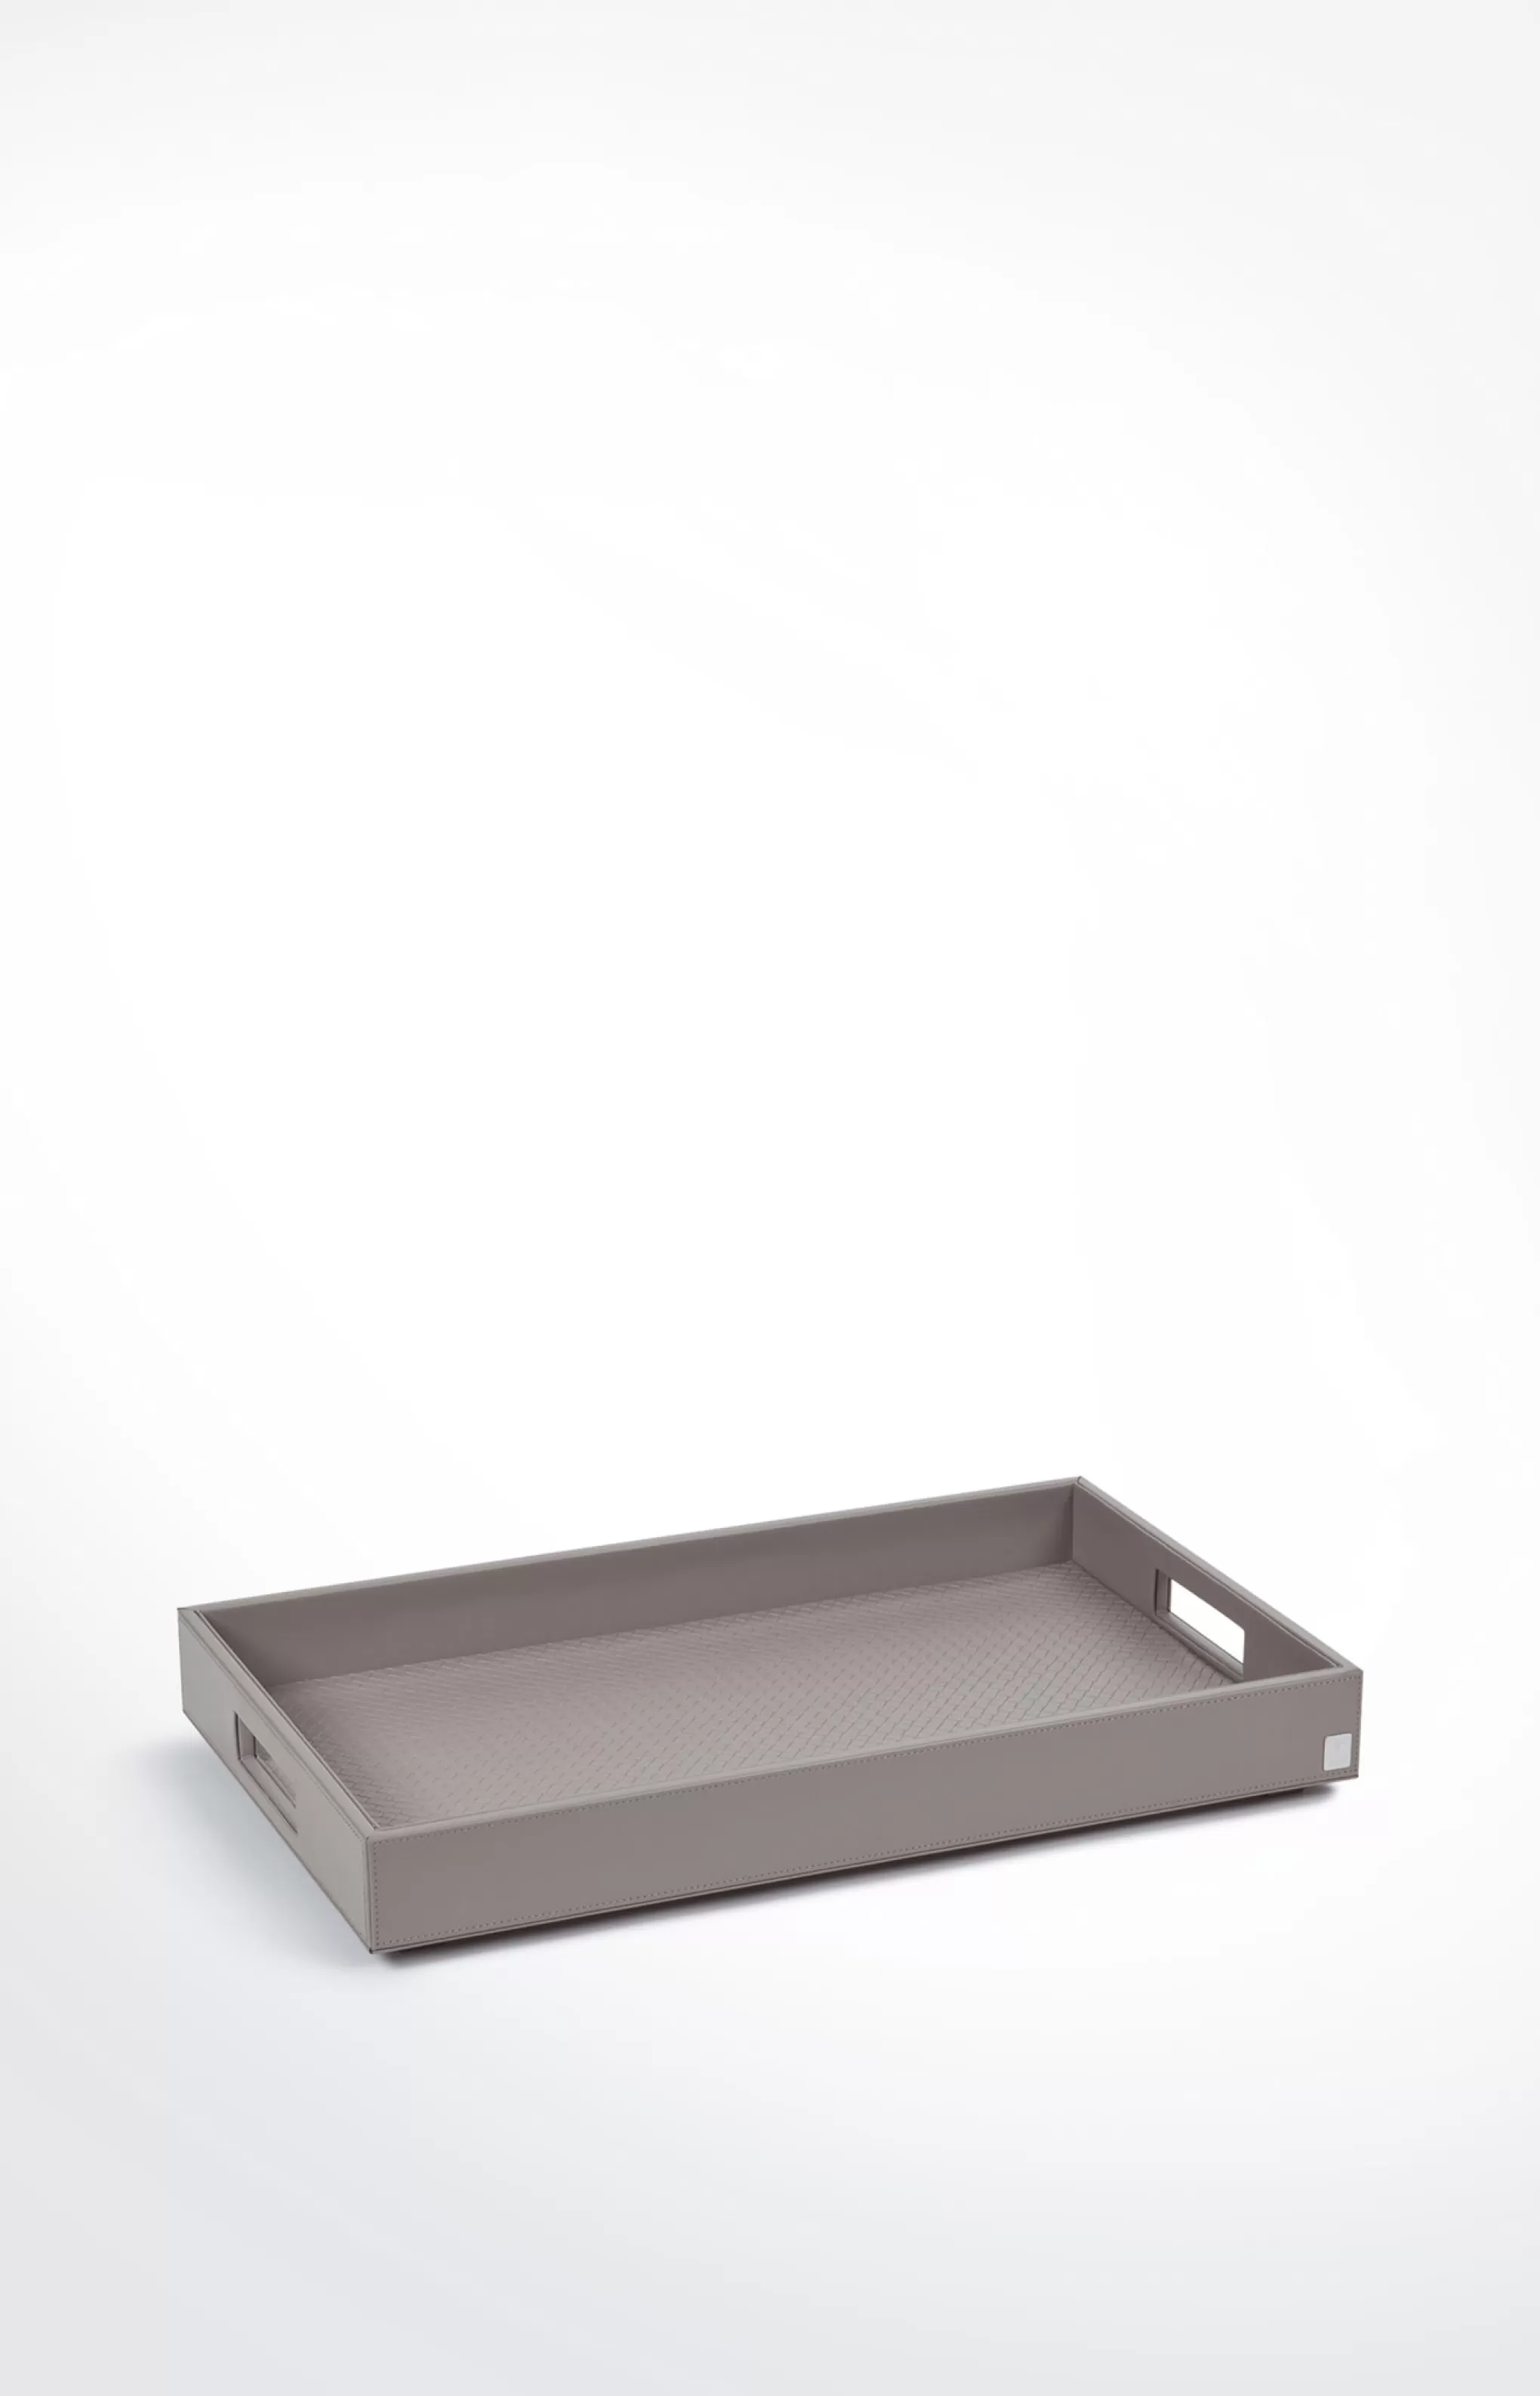 Bathroom Accessories | Discover Everything | Home Accessories | Table Accessories*JOOP Bathroom Accessories | Discover Everything | Home Accessories | Table Accessories Homeline tray, grey-rosé